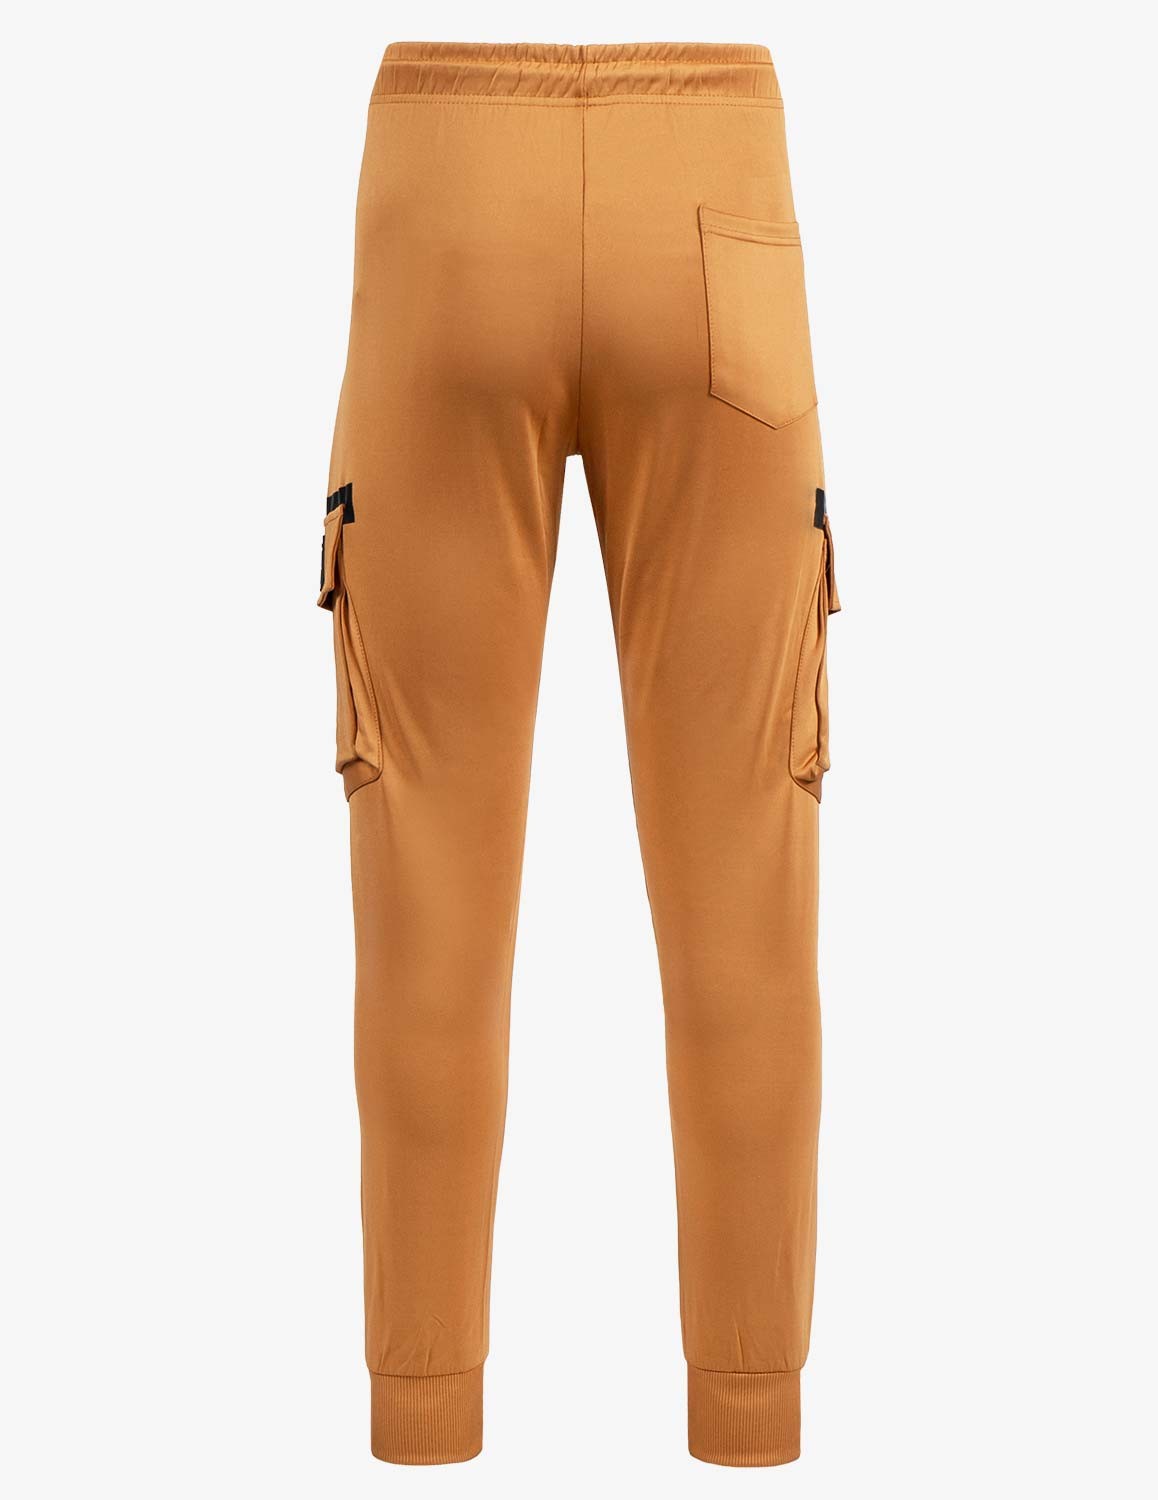 THE PUNISHER Sweatpants Copper